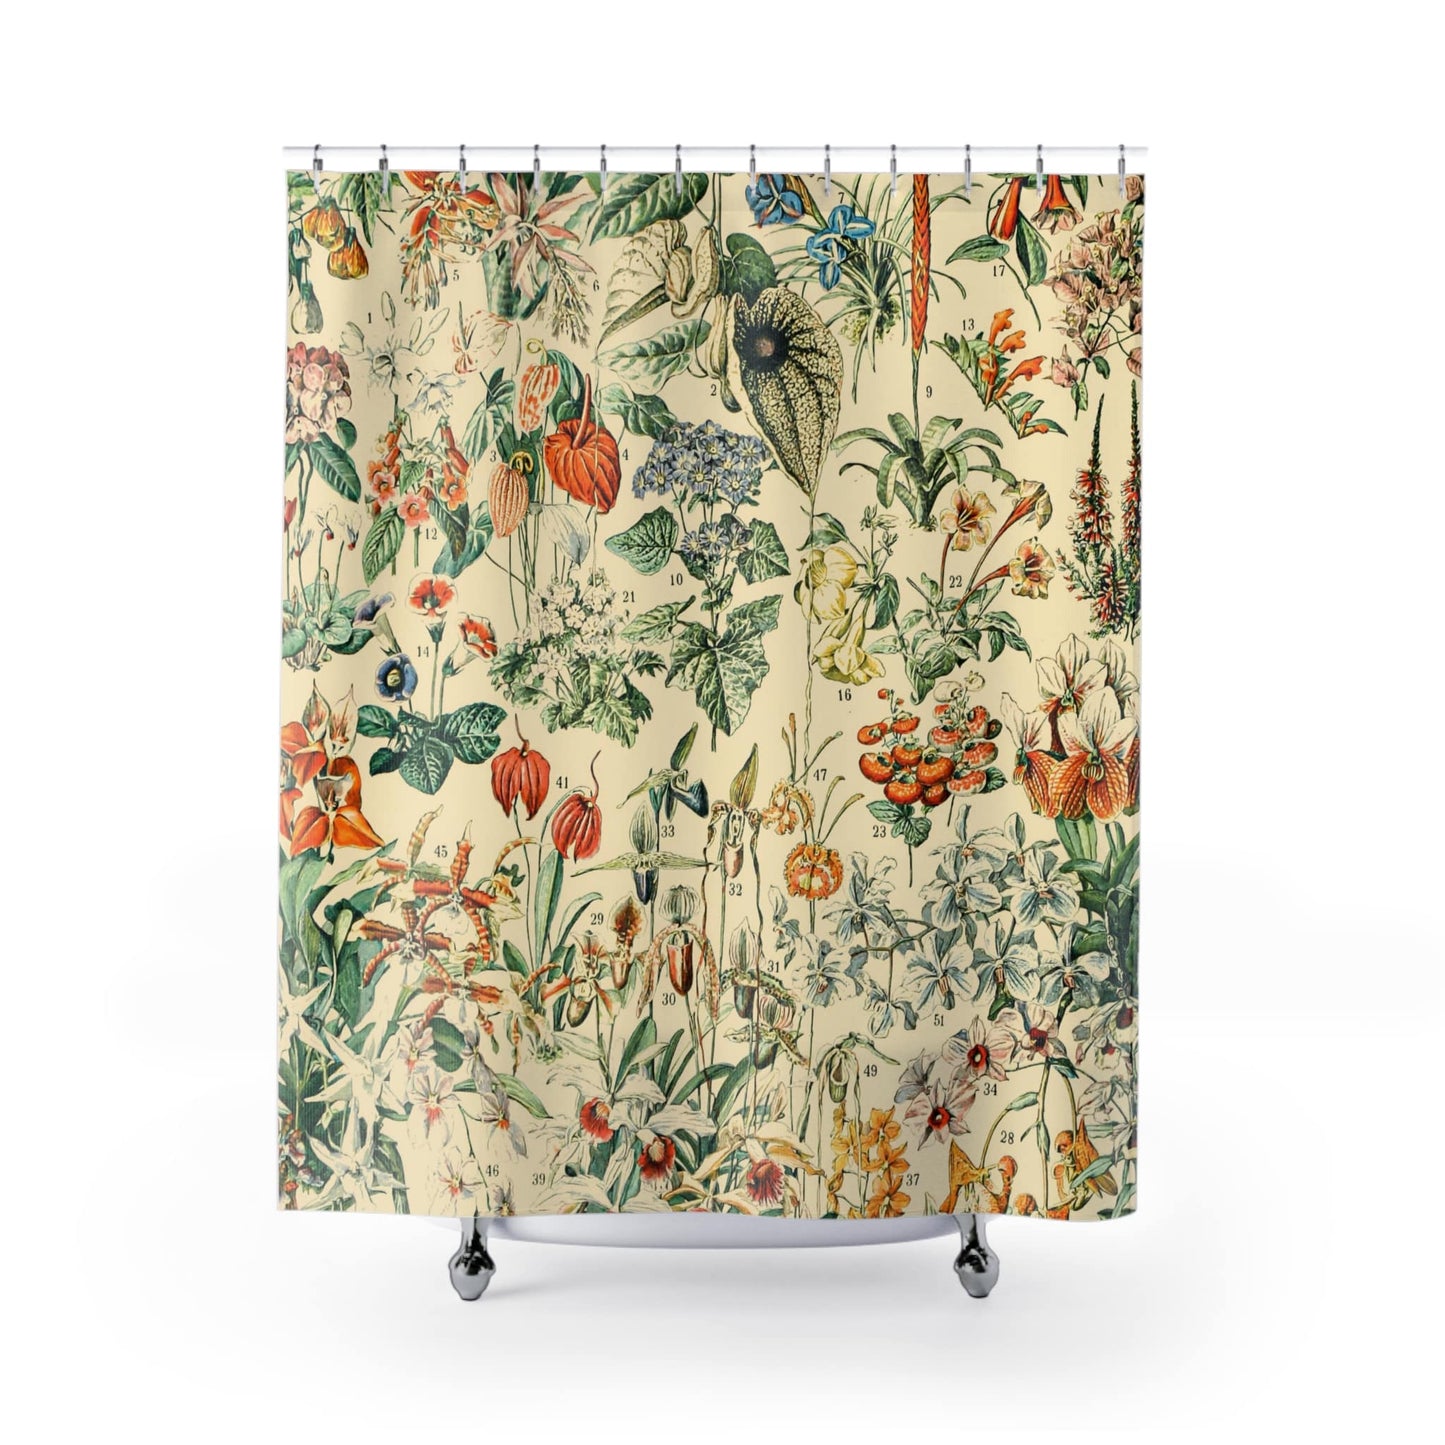 Wildflower and Plants Shower Curtain with floral design, garden-themed bathroom decor featuring detailed plant artwork.